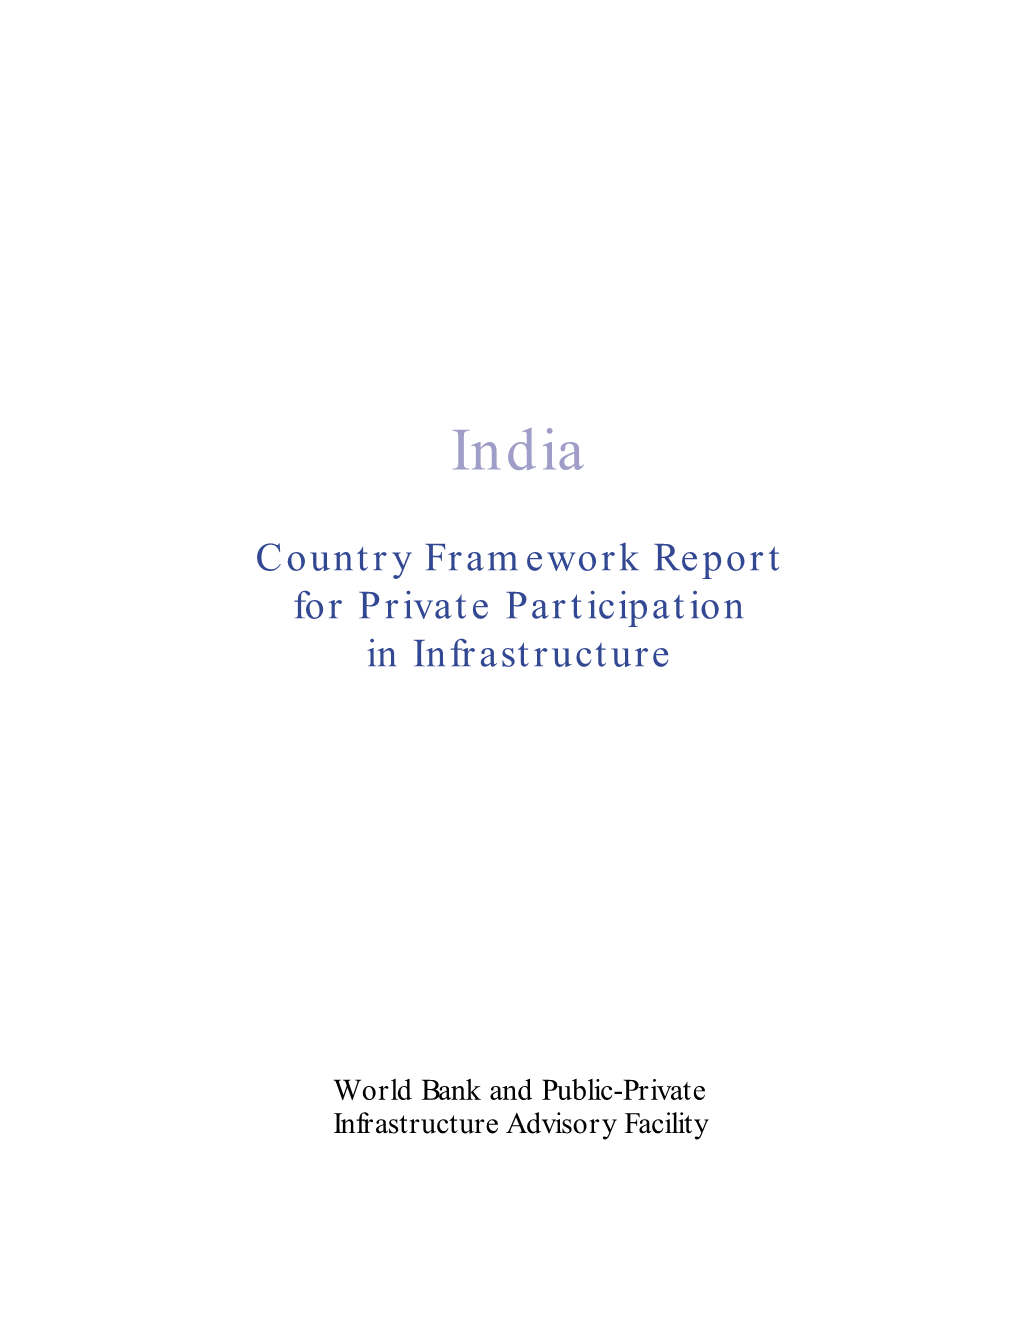 Country Framework Report for Private Participation in Infrastructure